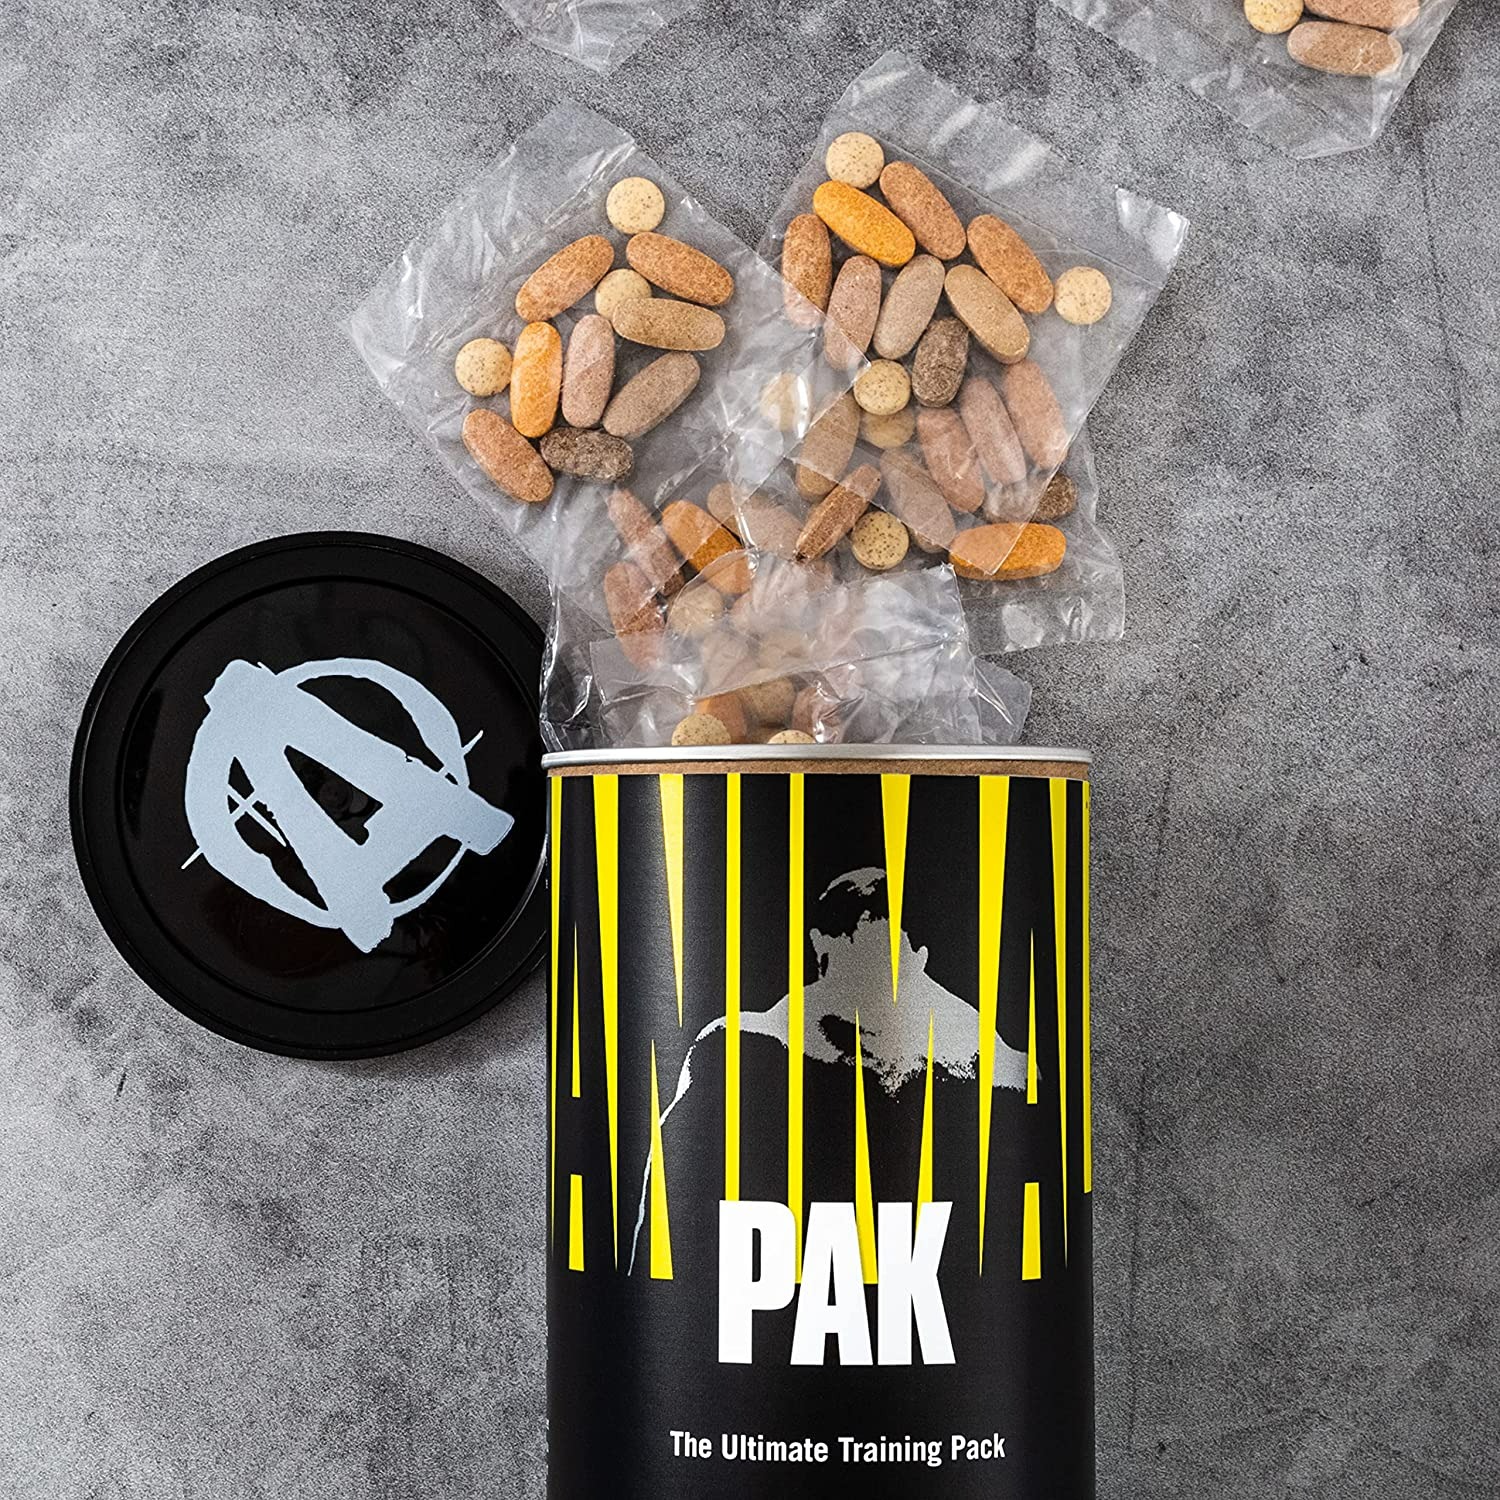 Animal Pak - Convenient All-in-One Vitamin & Supplement Pack - 44 Adet-2